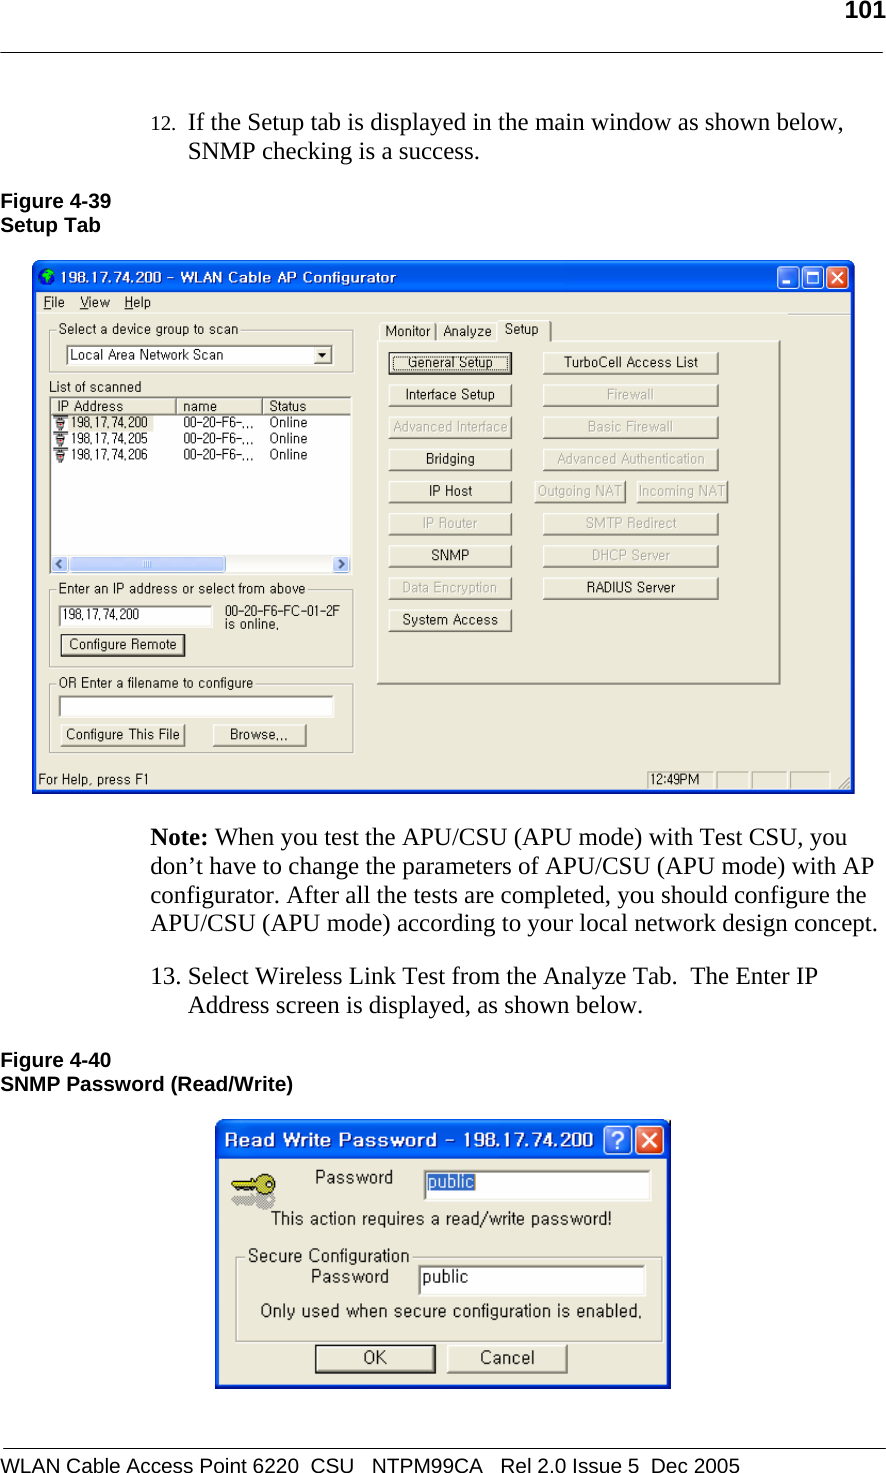   101  WLAN Cable Access Point 6220  CSU   NTPM99CA   Rel 2.0 Issue 5  Dec 2005 12. If the Setup tab is displayed in the main window as shown below, SNMP checking is a success.  Figure 4-39 Setup Tab     Note: When you test the APU/CSU (APU mode) with Test CSU, you don’t have to change the parameters of APU/CSU (APU mode) with AP configurator. After all the tests are completed, you should configure the APU/CSU (APU mode) according to your local network design concept.  13. Select Wireless Link Test from the Analyze Tab.  The Enter IP Address screen is displayed, as shown below.  Figure 4-40 SNMP Password (Read/Write)    